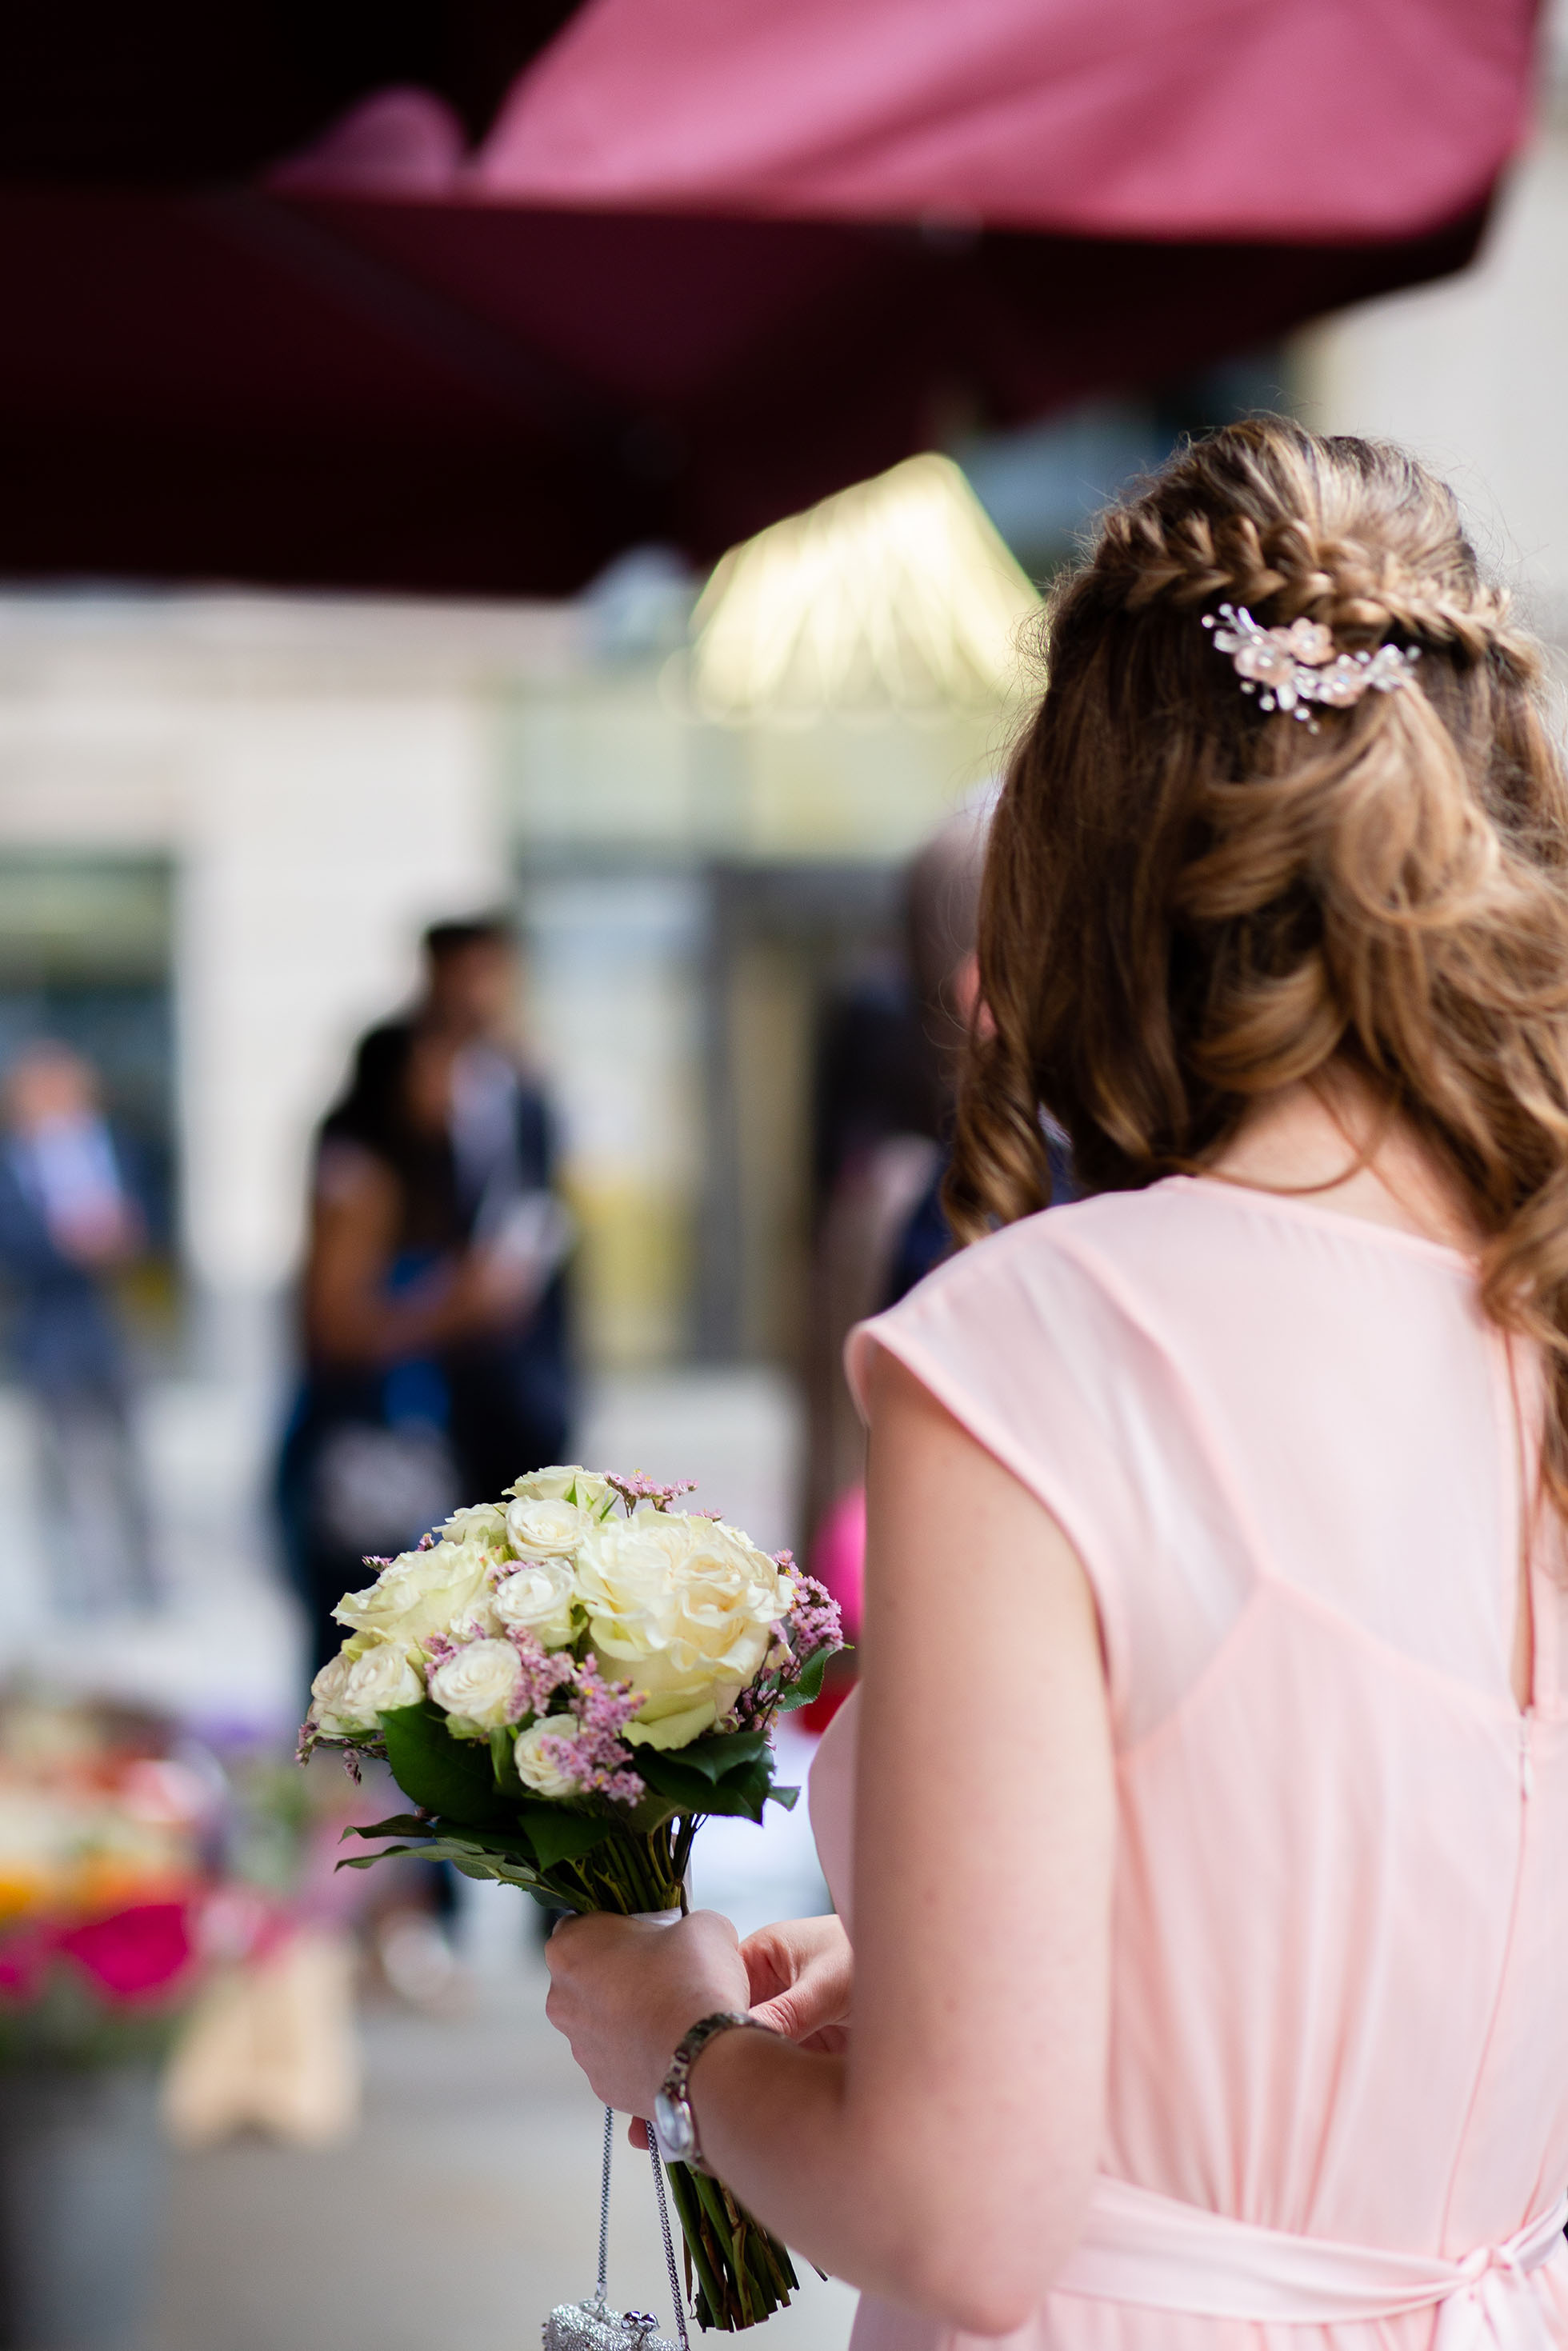 A bridesmaid holding the bridal bouquet, wearing a soft pink dress, captured from behind during wedding photography.